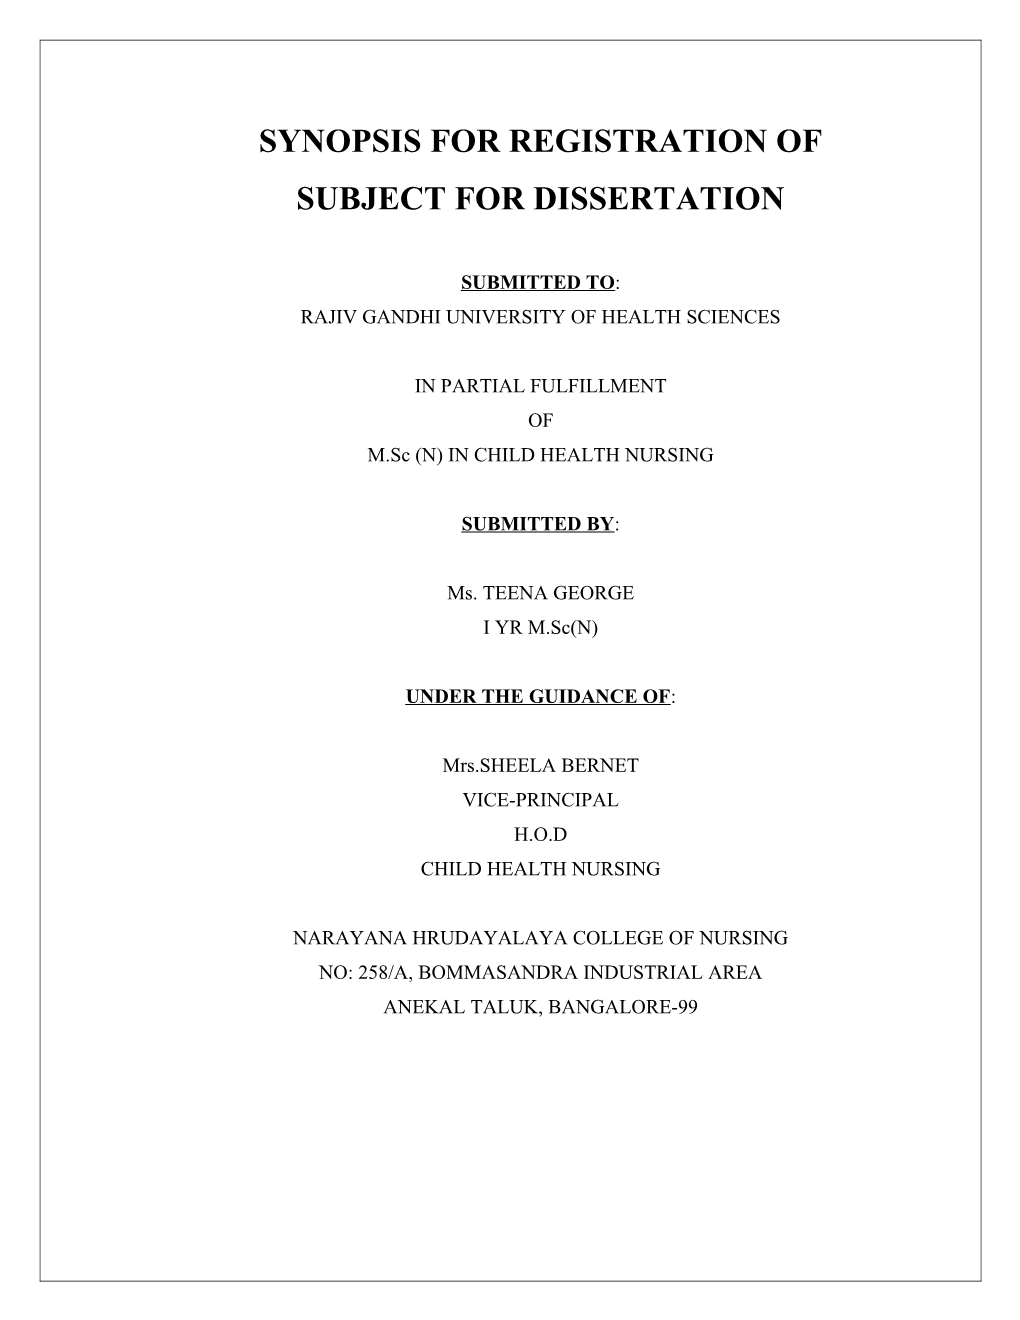 Synopsis for Registration of Subject for Dissertation